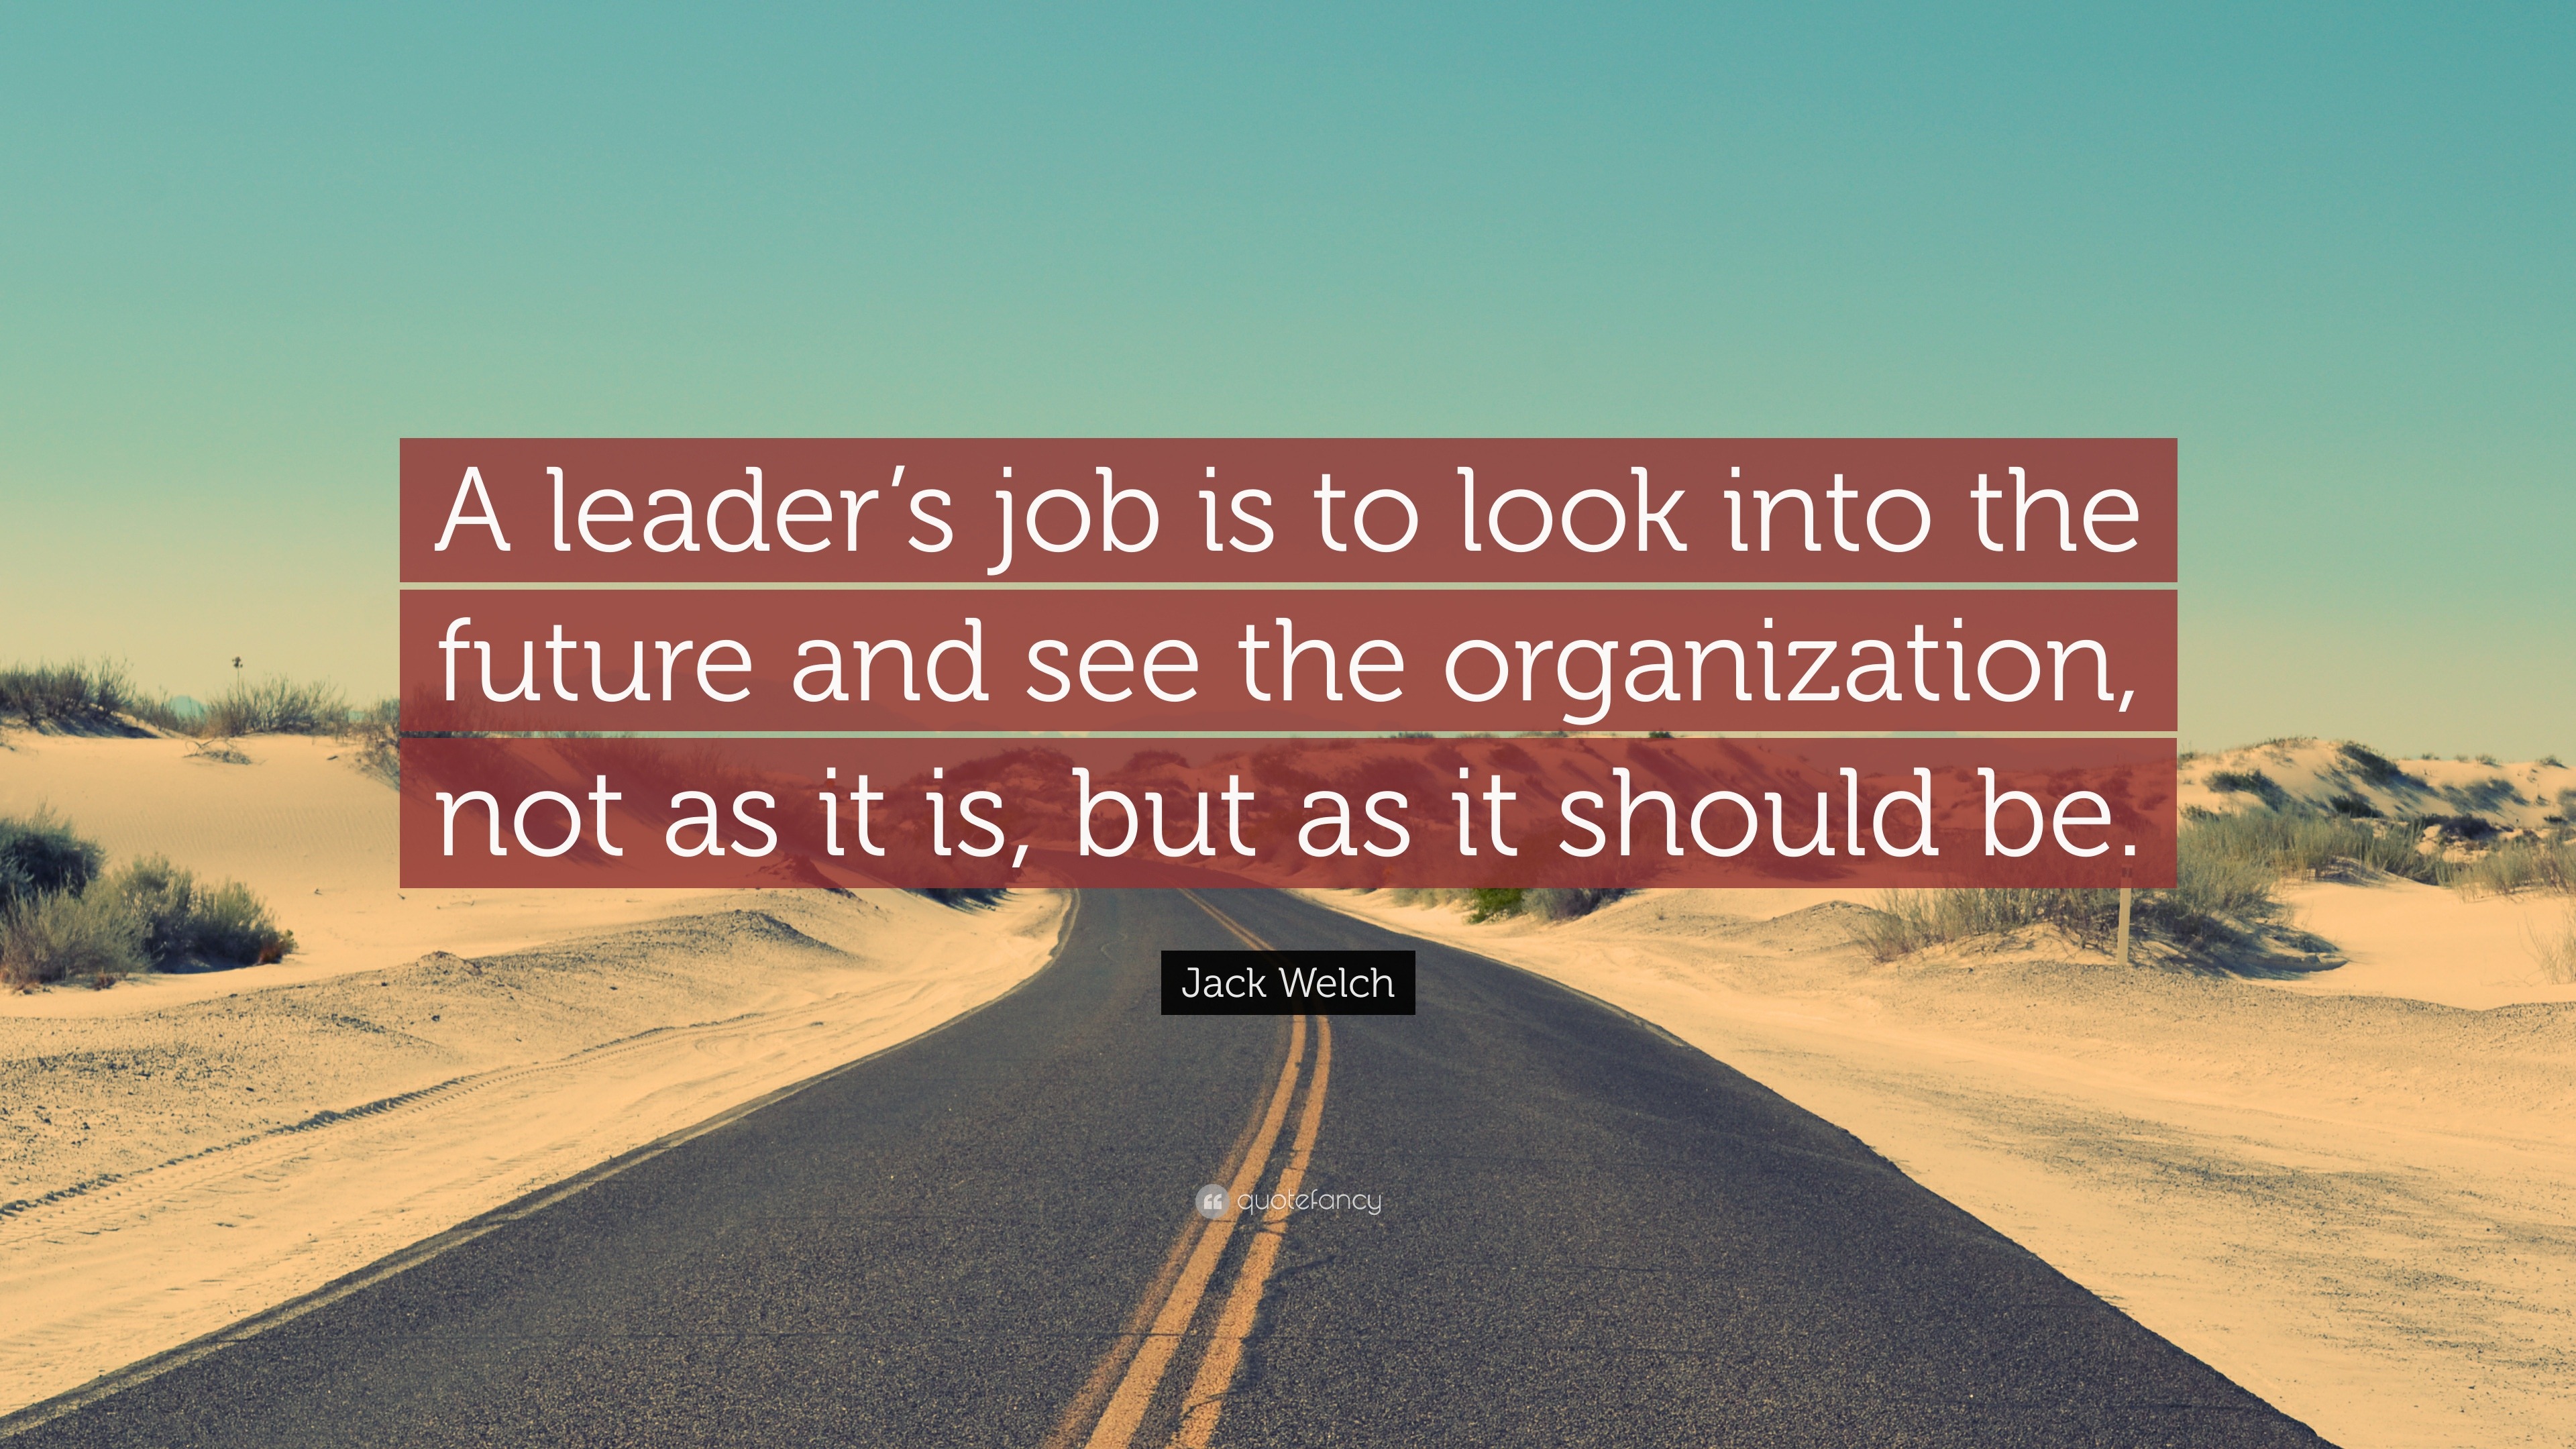 Jack Welch Quote: “A leader’s job is to look into the future and see